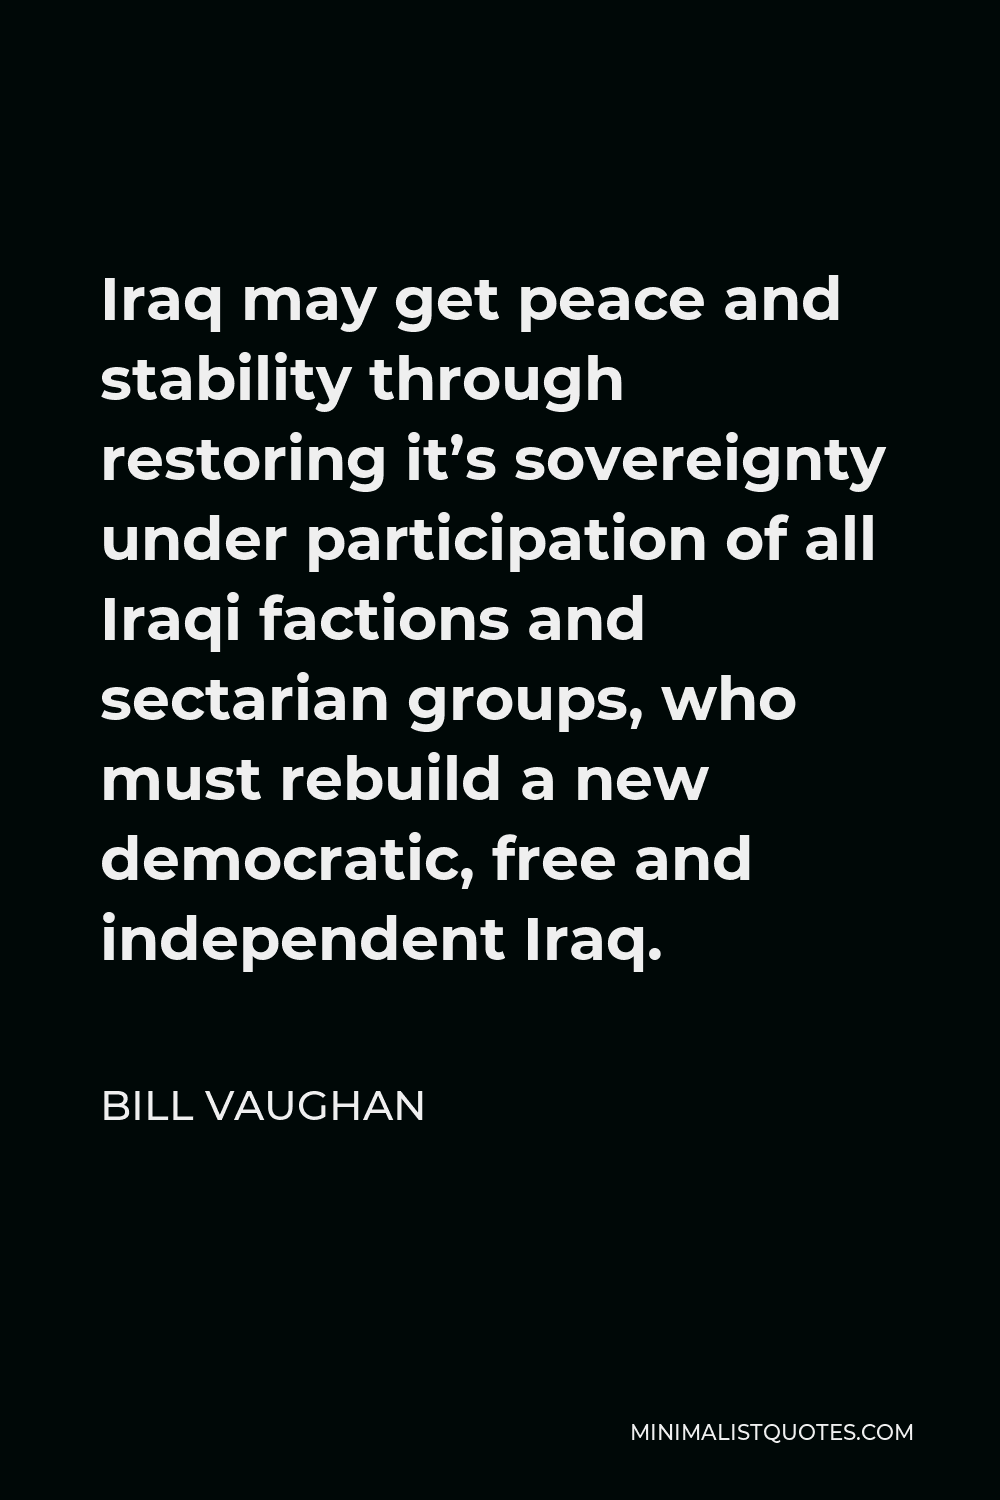 Bill Vaughan Quote - Iraq may get peace and stability through restoring it’s sovereignty under participation of all Iraqi factions and sectarian groups, who must rebuild a new democratic, free and independent Iraq.